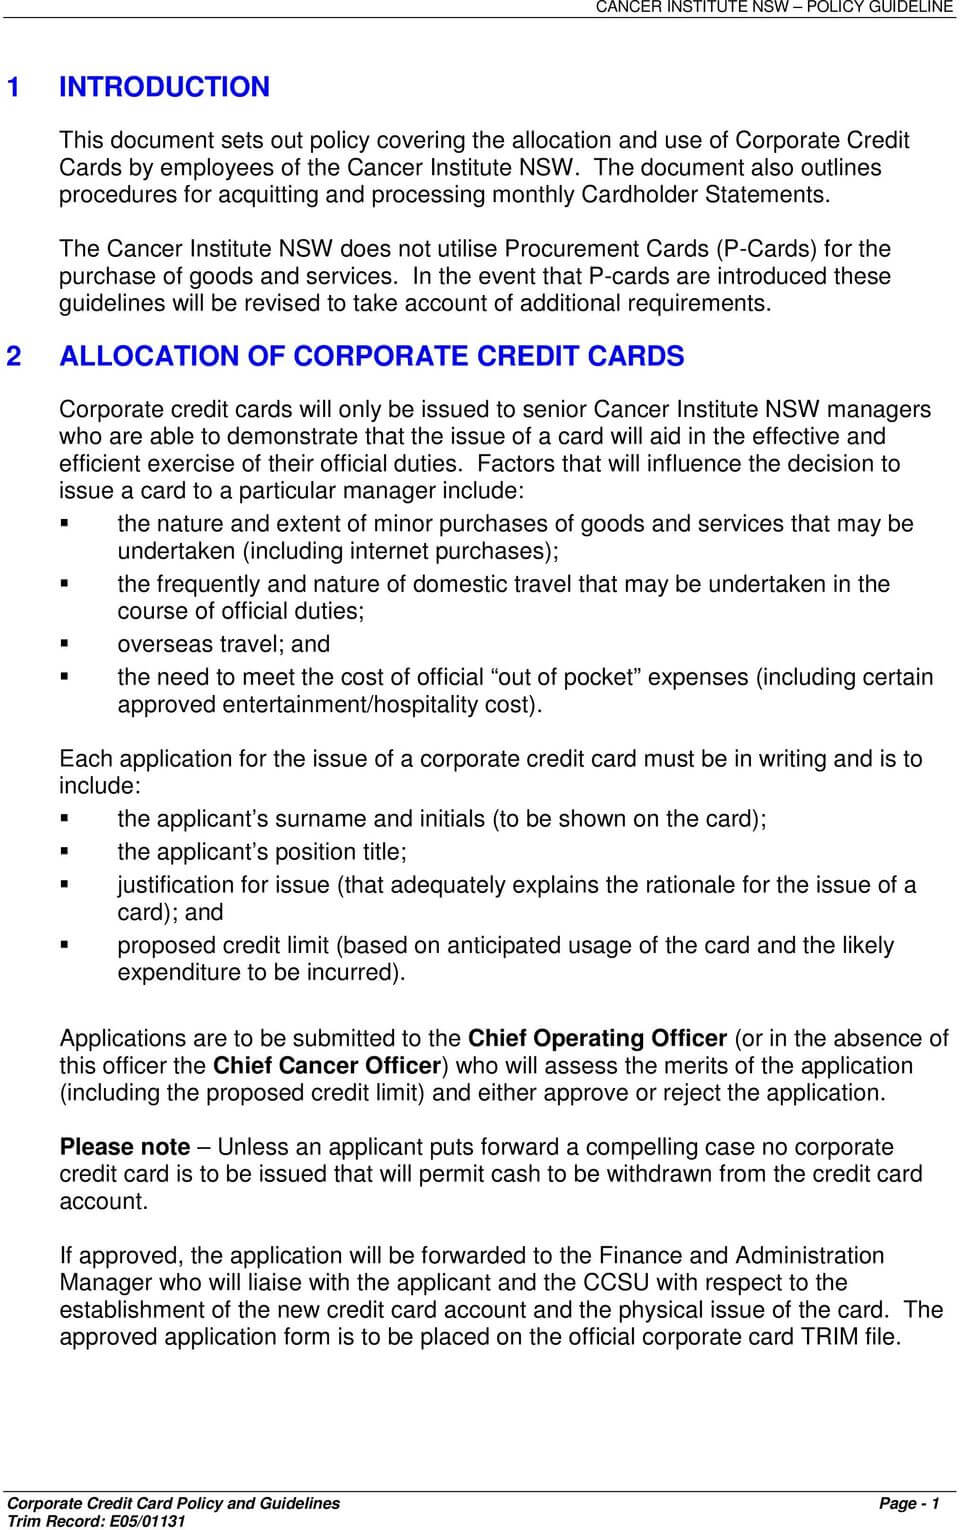 Corporate Credit Card Policy Template ] – Procurement Cards Within Company Credit Card Policy Template